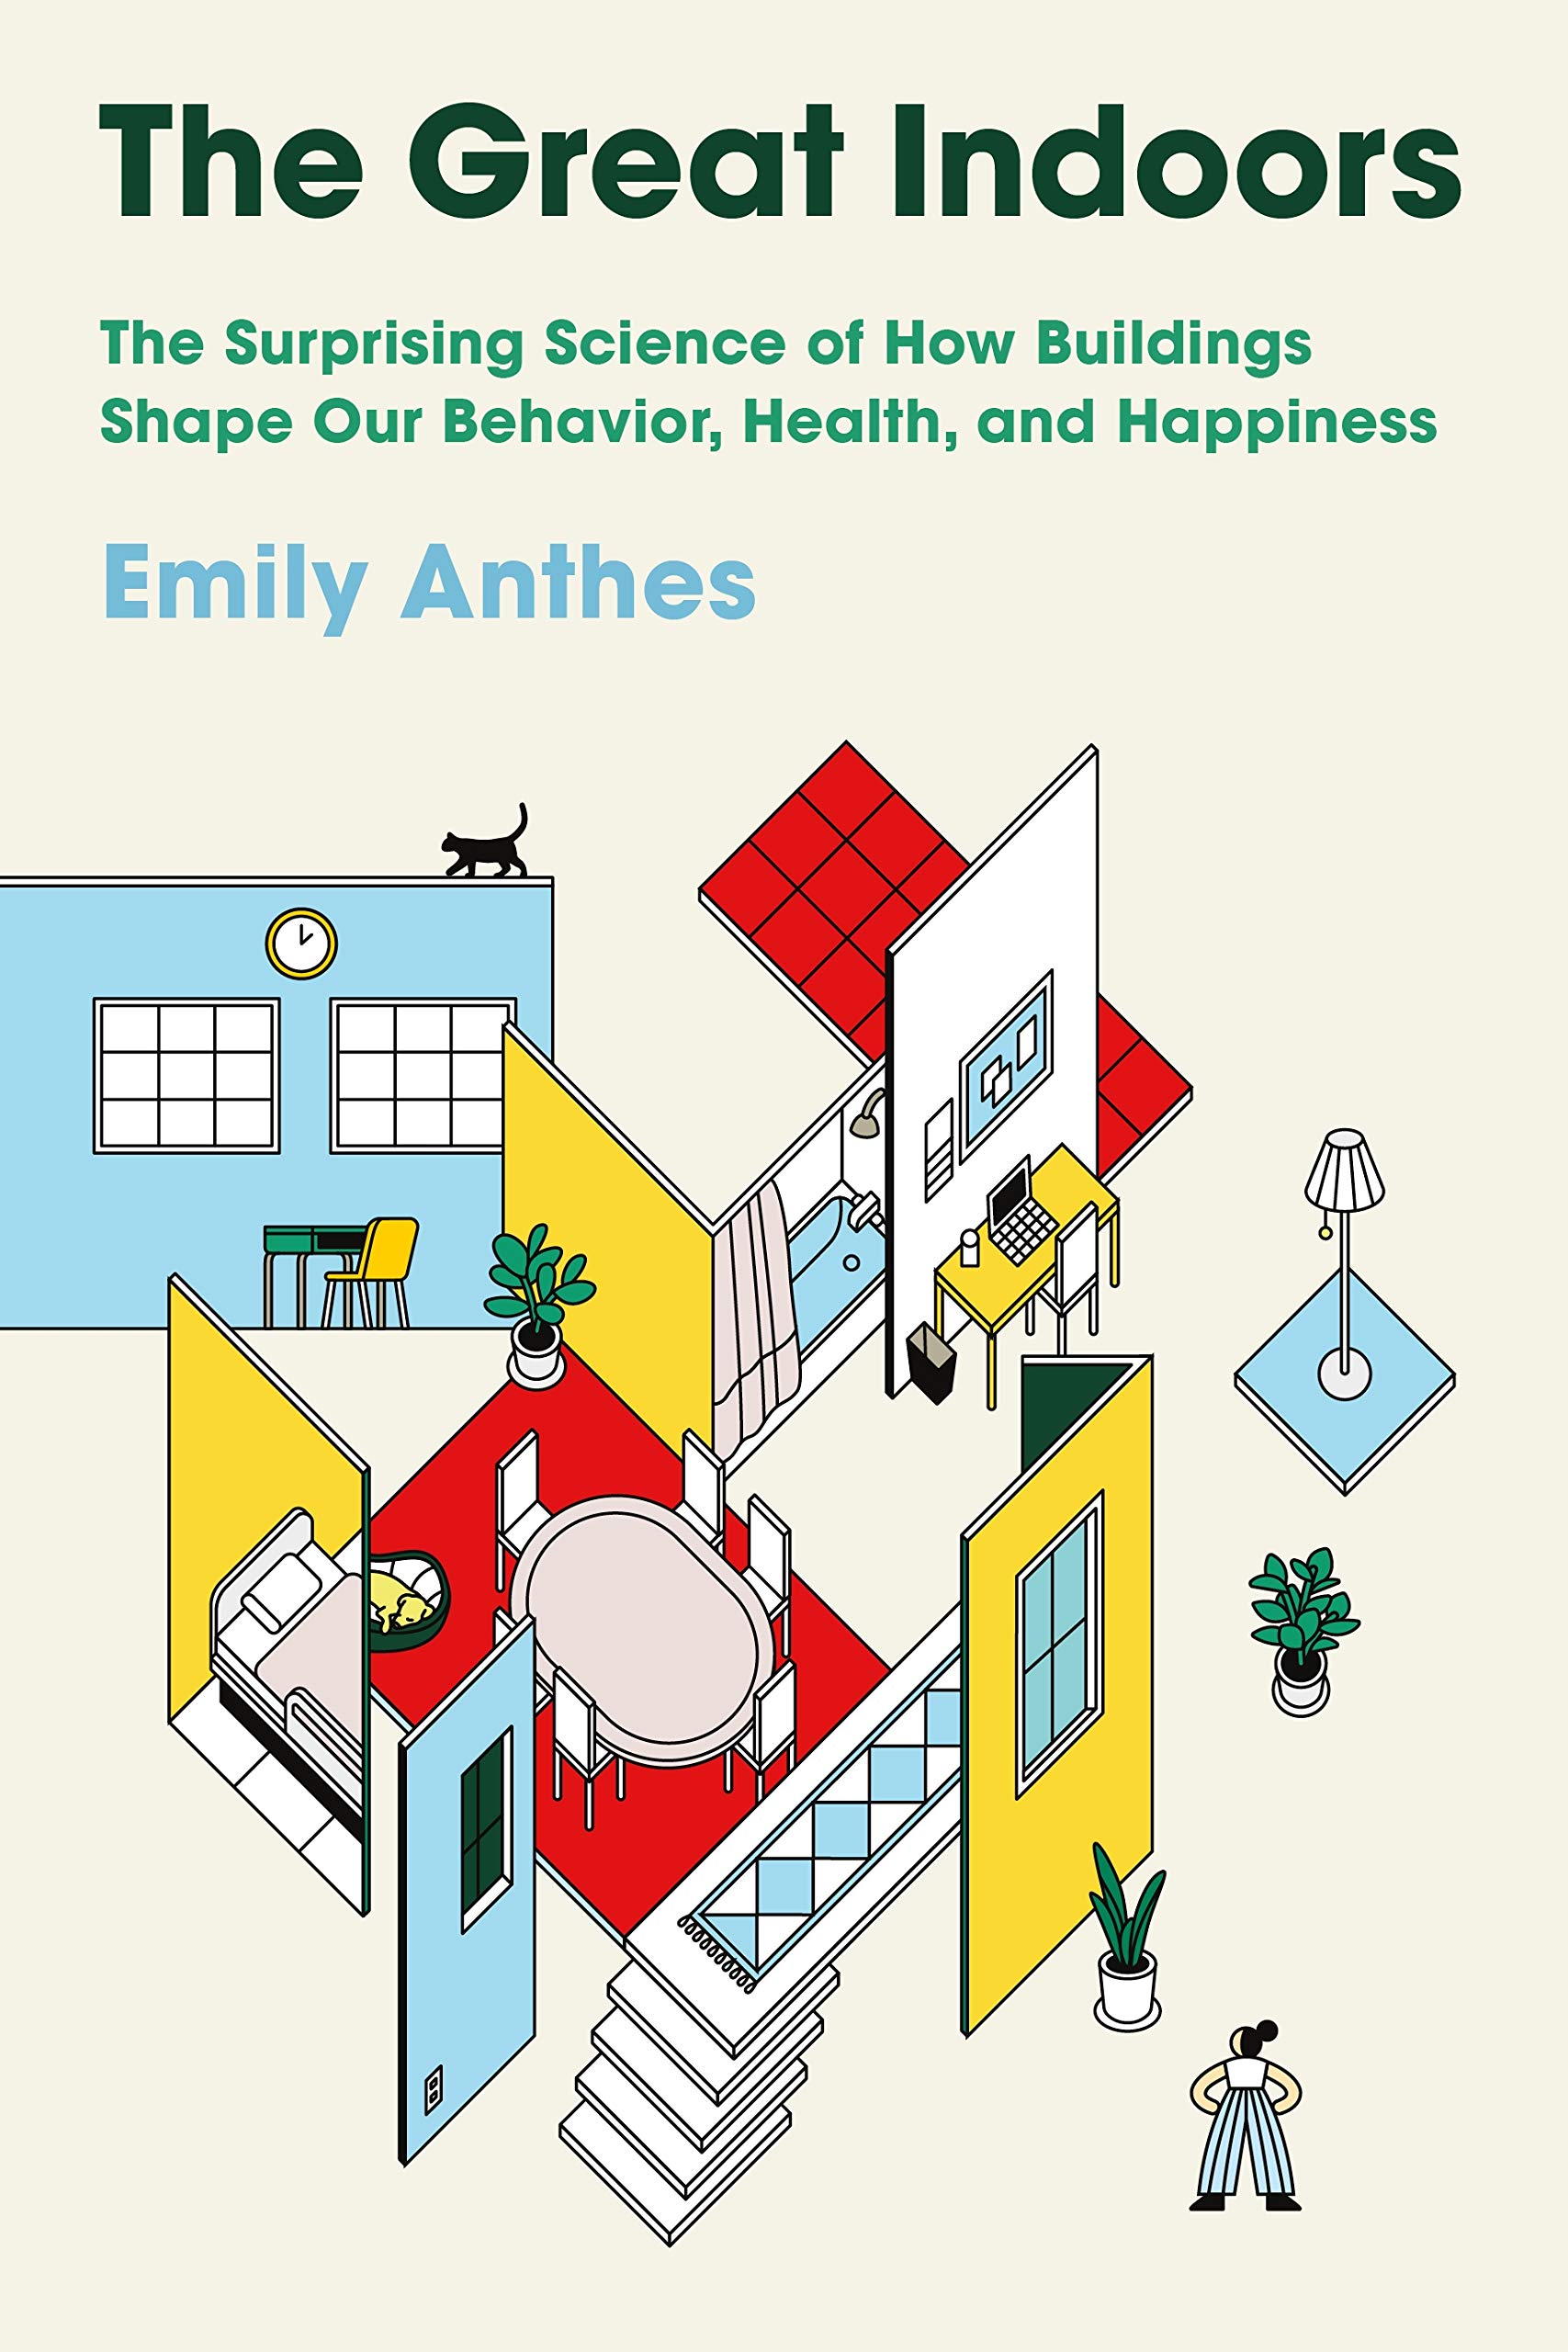 the great indoors: the surprising science of how buildings shape our behavior health and happiness by emily anthes